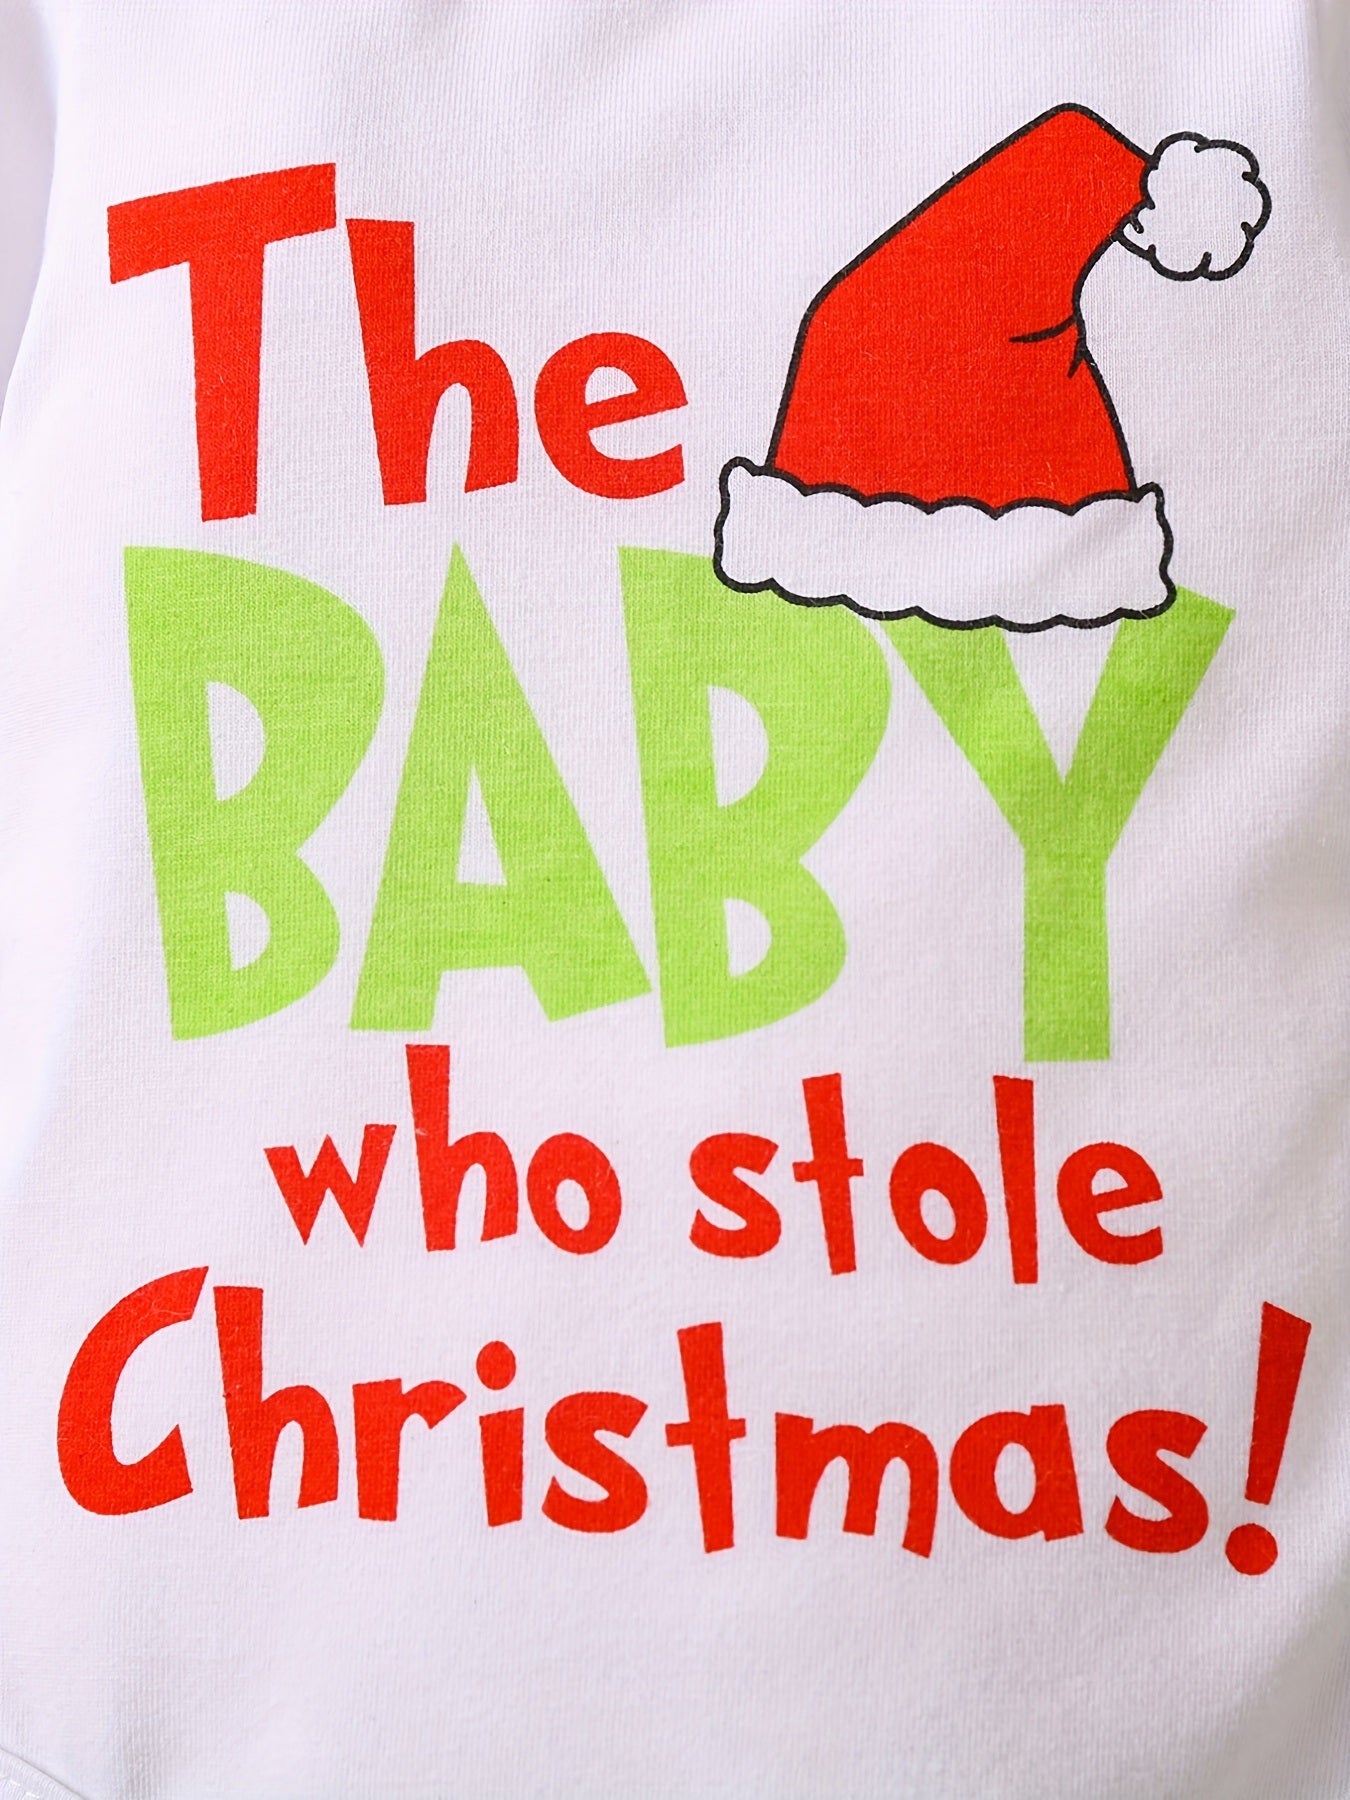 Adorable Baby Christmas Outfit - Funny Graphic Crew Neck Long Sleeve Romper + Green Fuzzy Suspender Pants Clothes Set